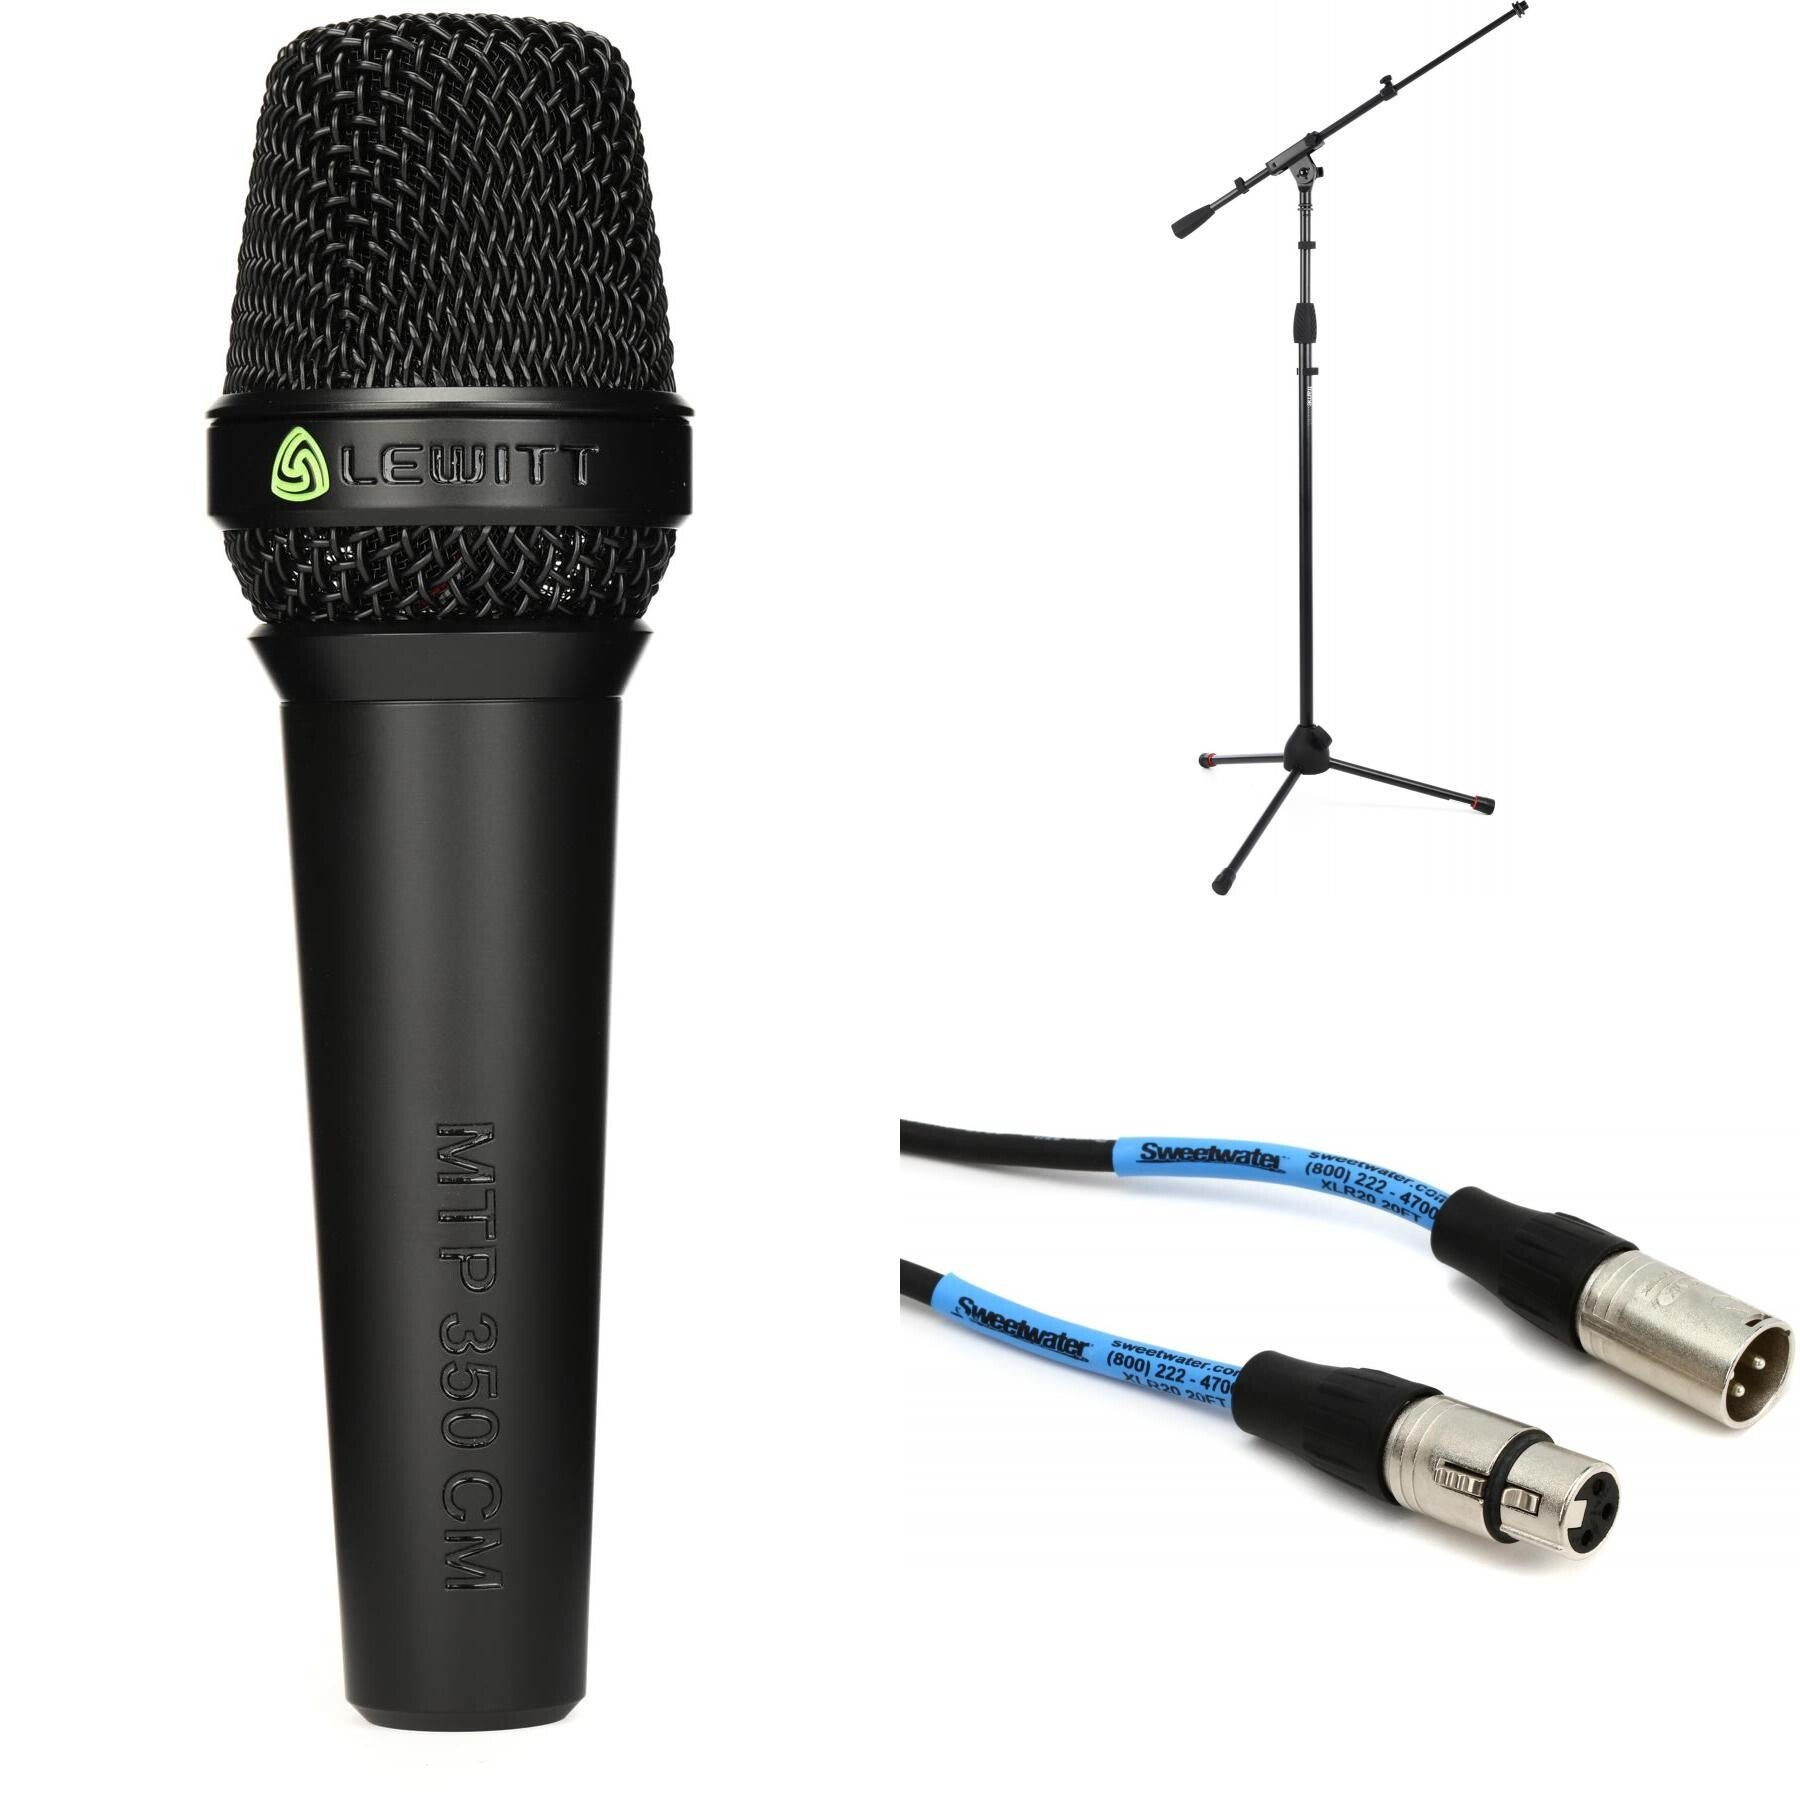 Lewitt MTP 350 CM Handheld Condenser Microphone With Stand and Cable